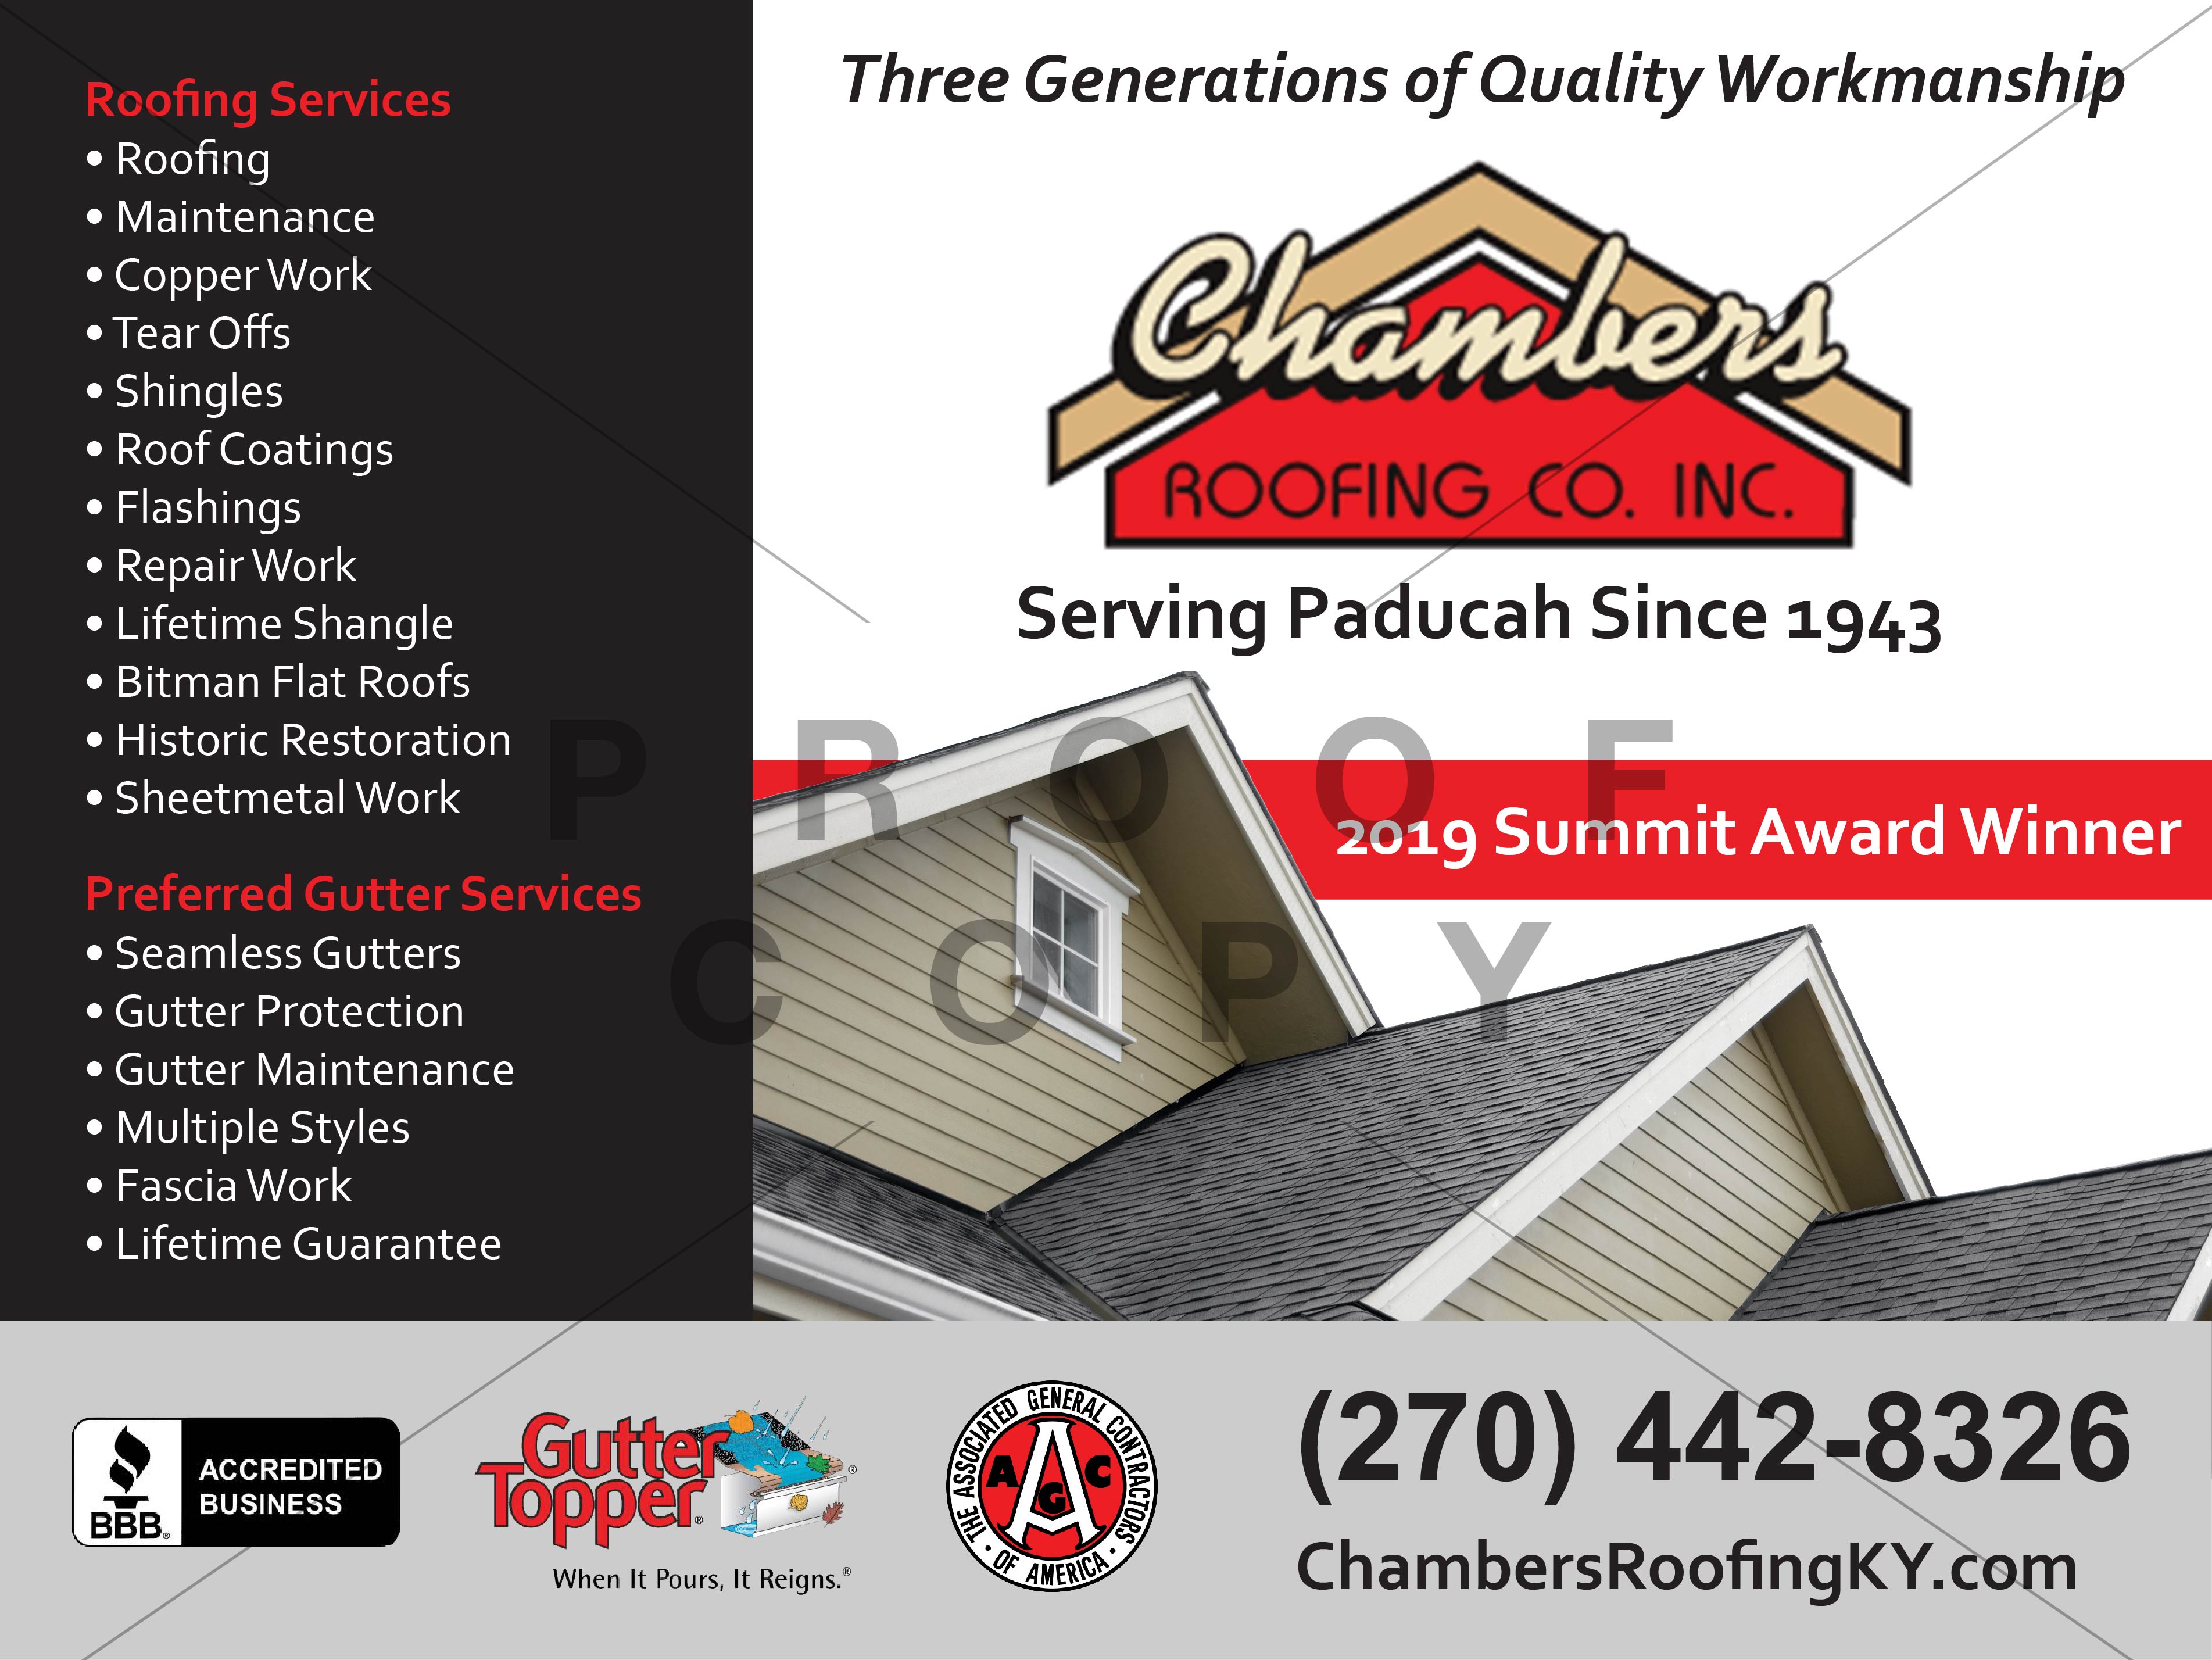 Construction Chambers Roofing Paducah KY